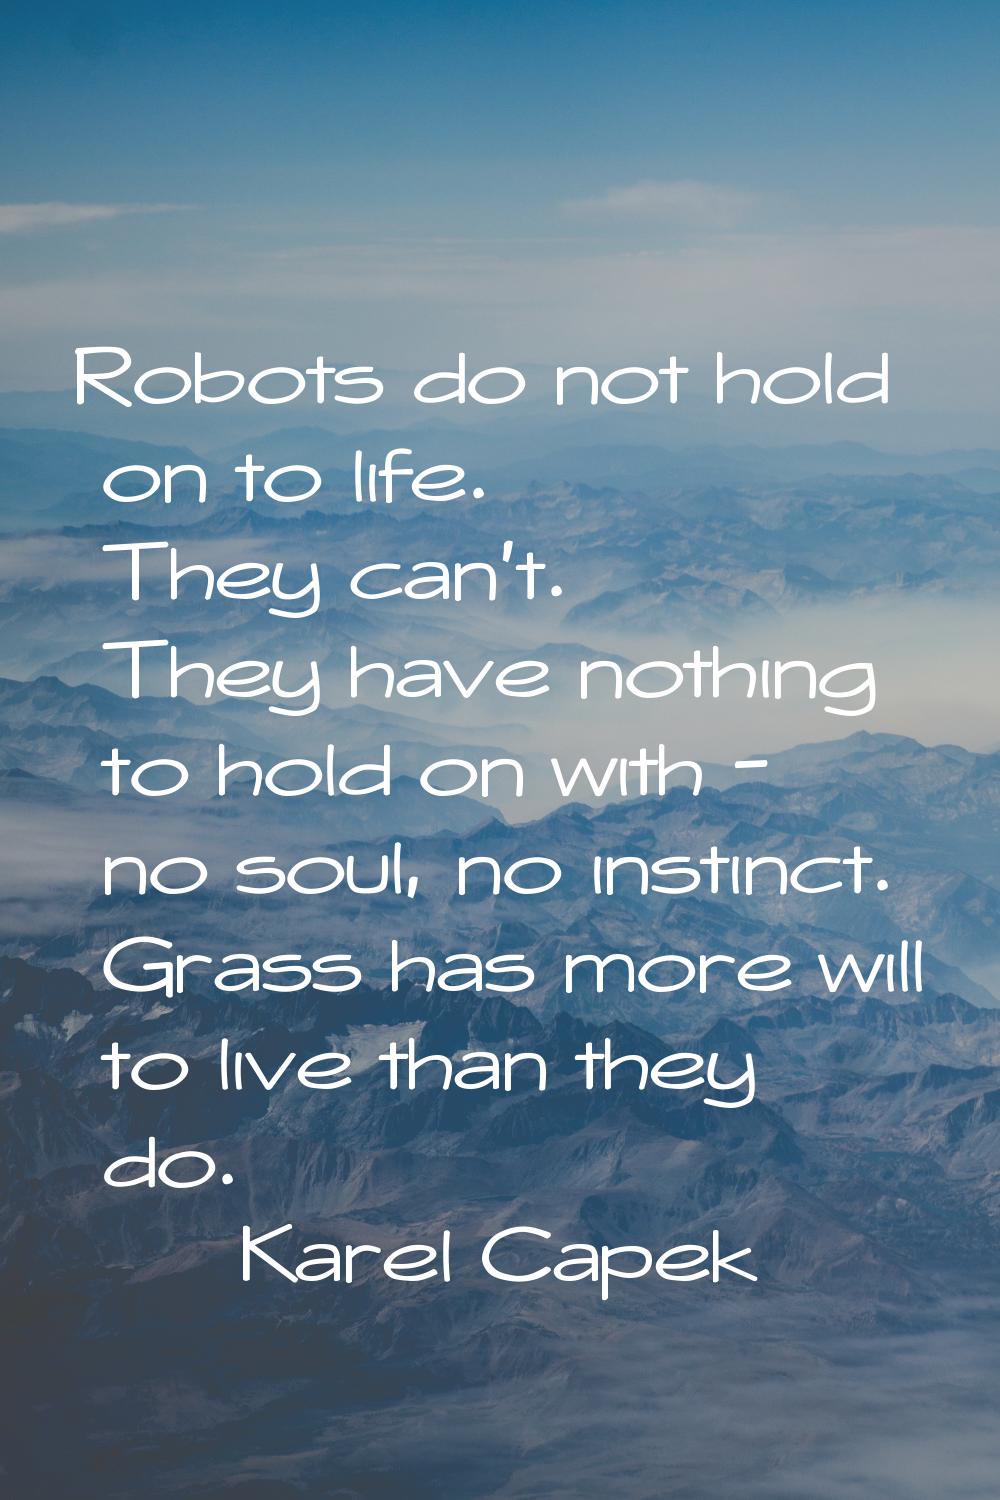 Robots do not hold on to life. They can't. They have nothing to hold on with - no soul, no instinct